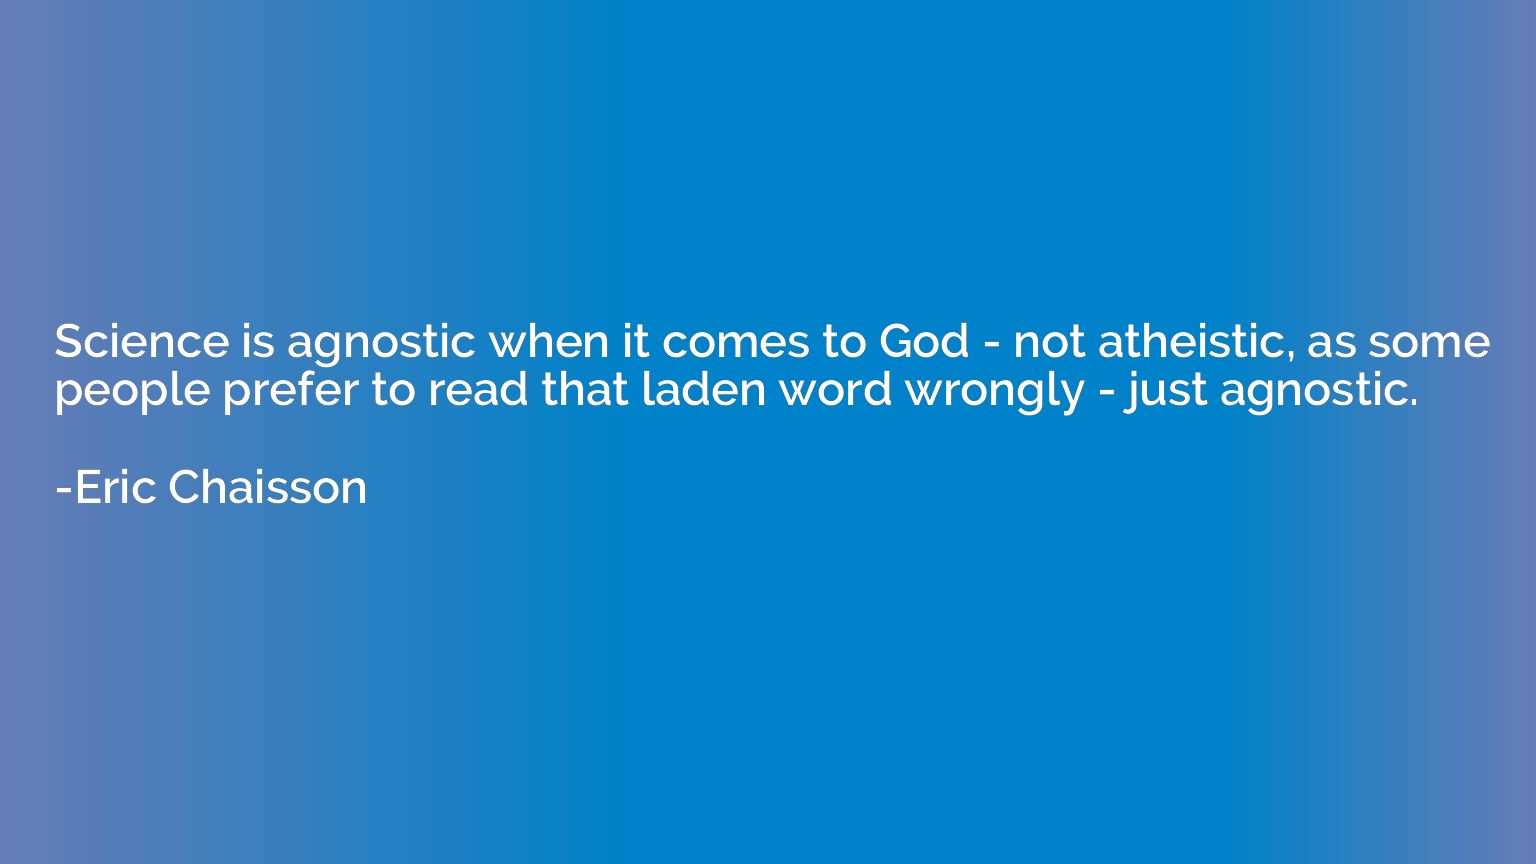 Science is agnostic when it comes to God - not atheistic, as